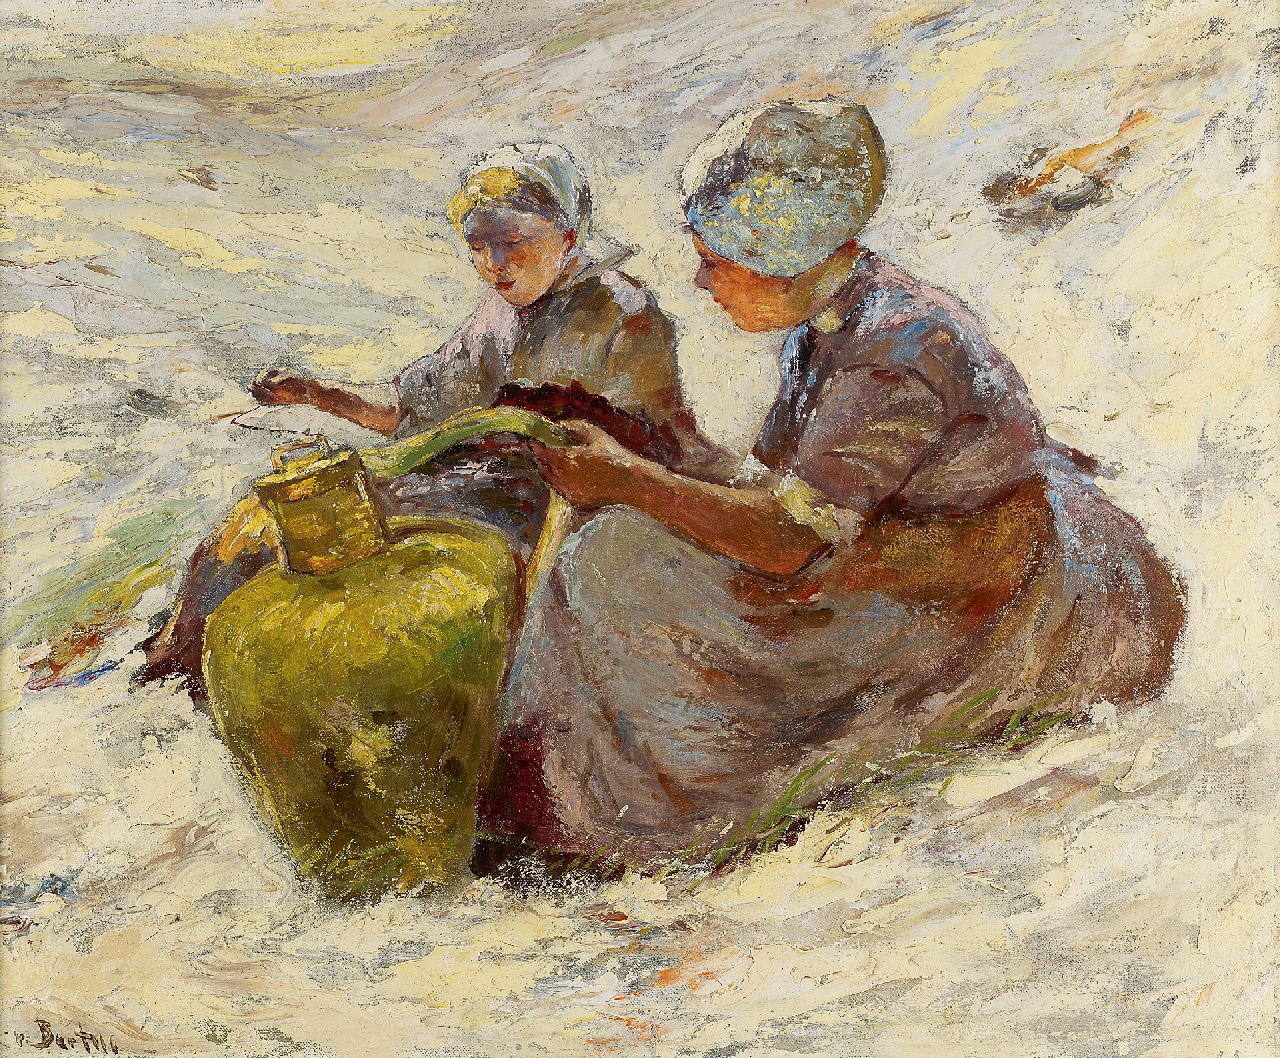 Bartels H. von | Hans von Bartels, Two fisherman's wives in the dunes, oil on canvas 50.2 x 59.9 cm, signed l.l.